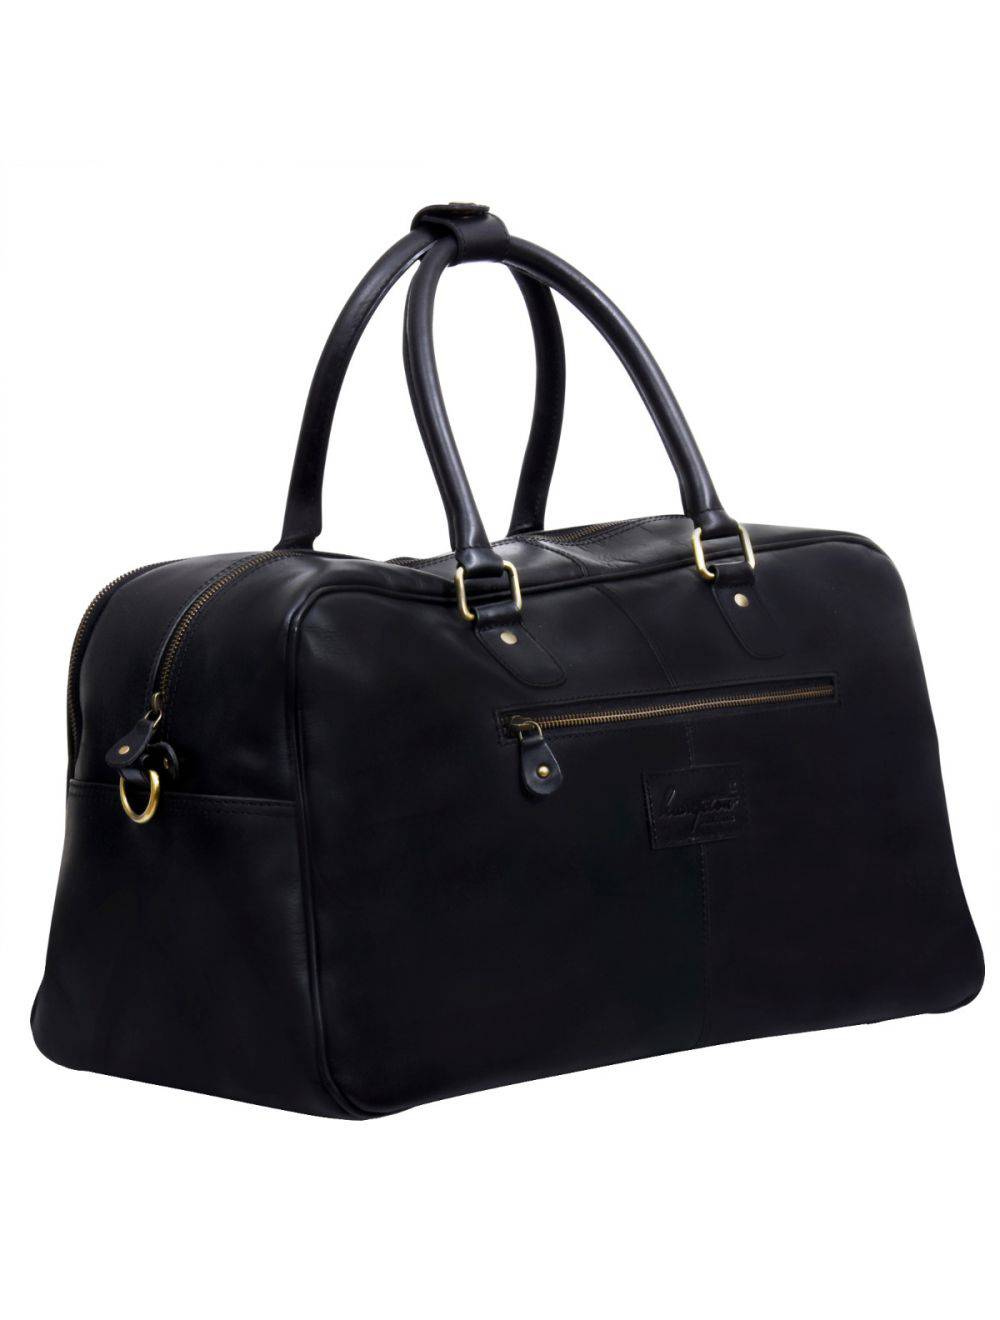 Black Leather Travel Carry On Duffle Bag Luggage for sale - Woodcock and Cavendish